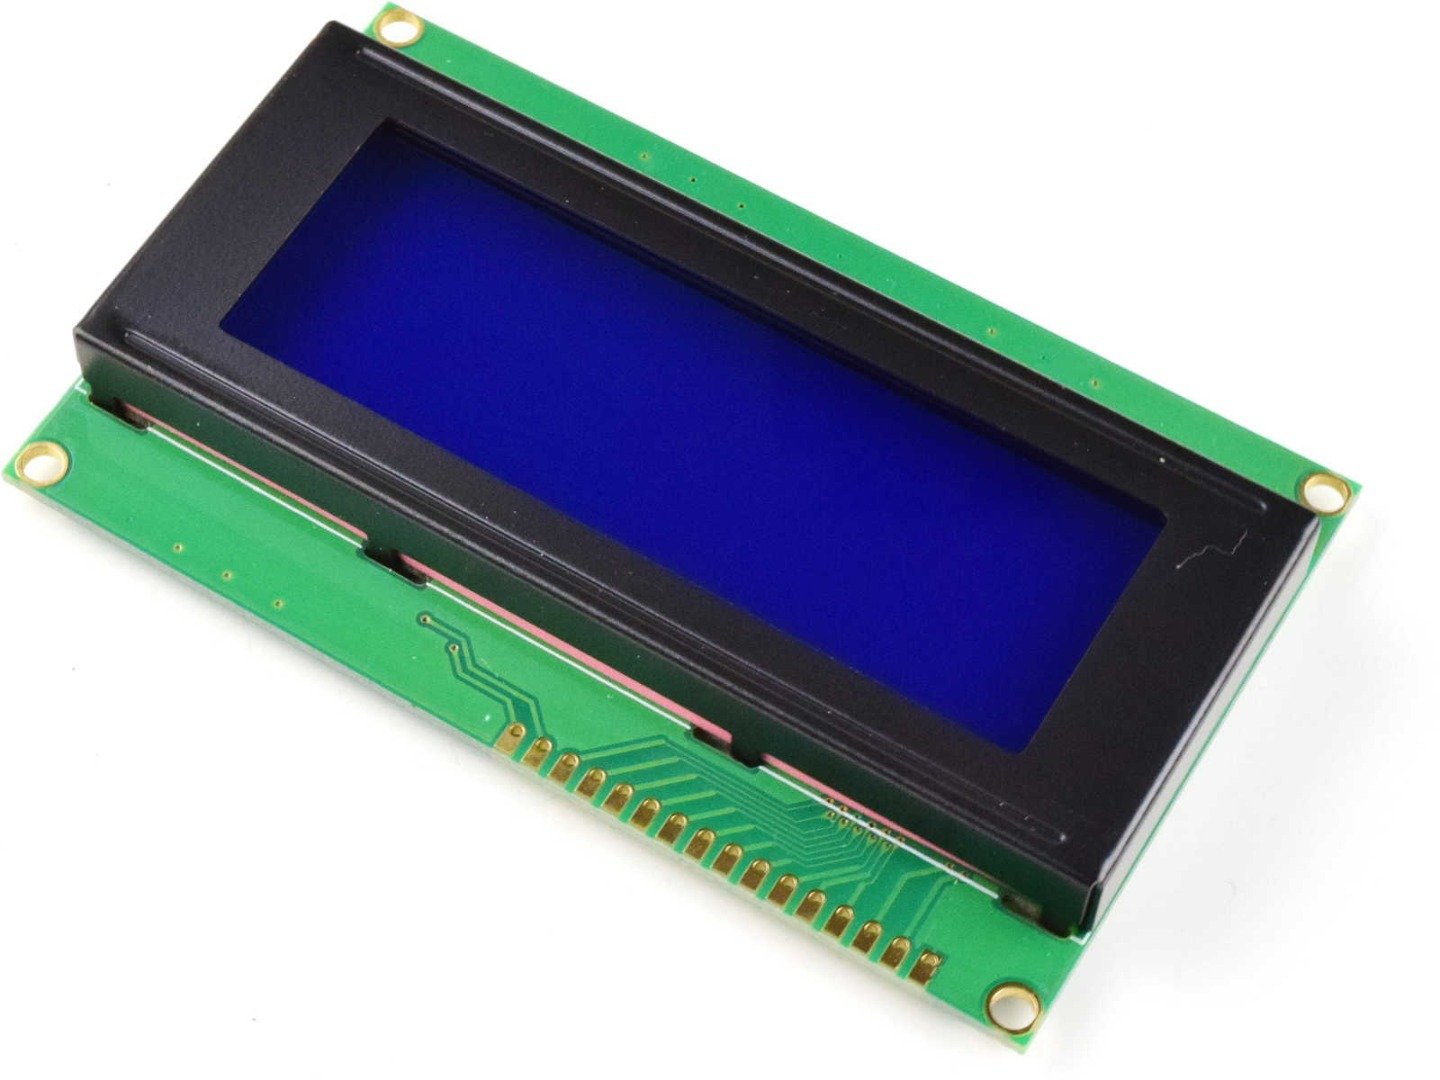 LCD 2004 20×4 Blue, White Backlight, parallel or I2C serial 8